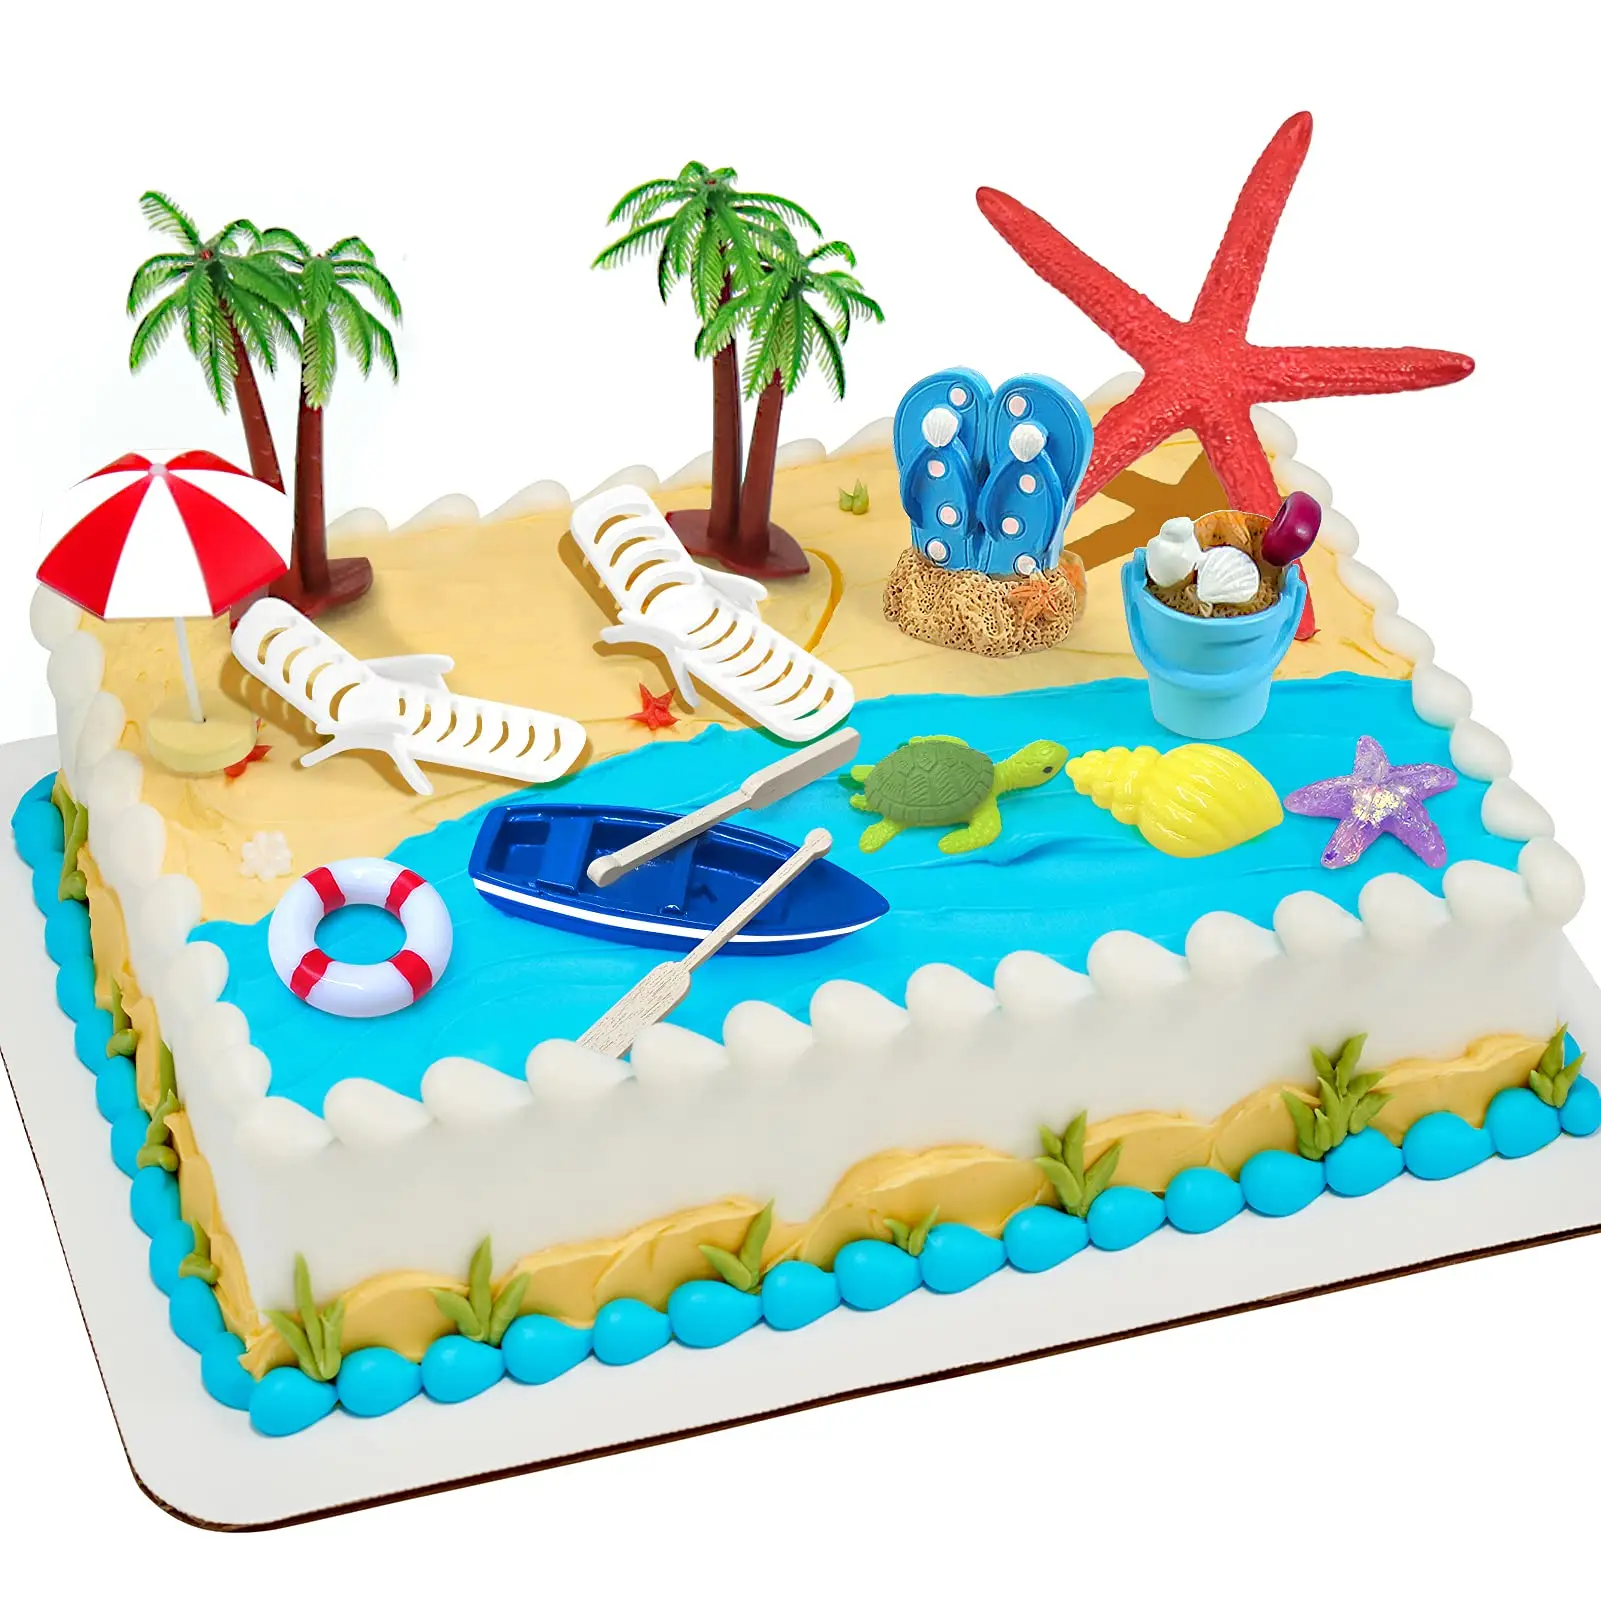 12pcs Summer Ocean Cake Toppers Set Beach Chair Cake Decoration Tropical Hawaiian Party Decorations Pool Party Birthday Supplies